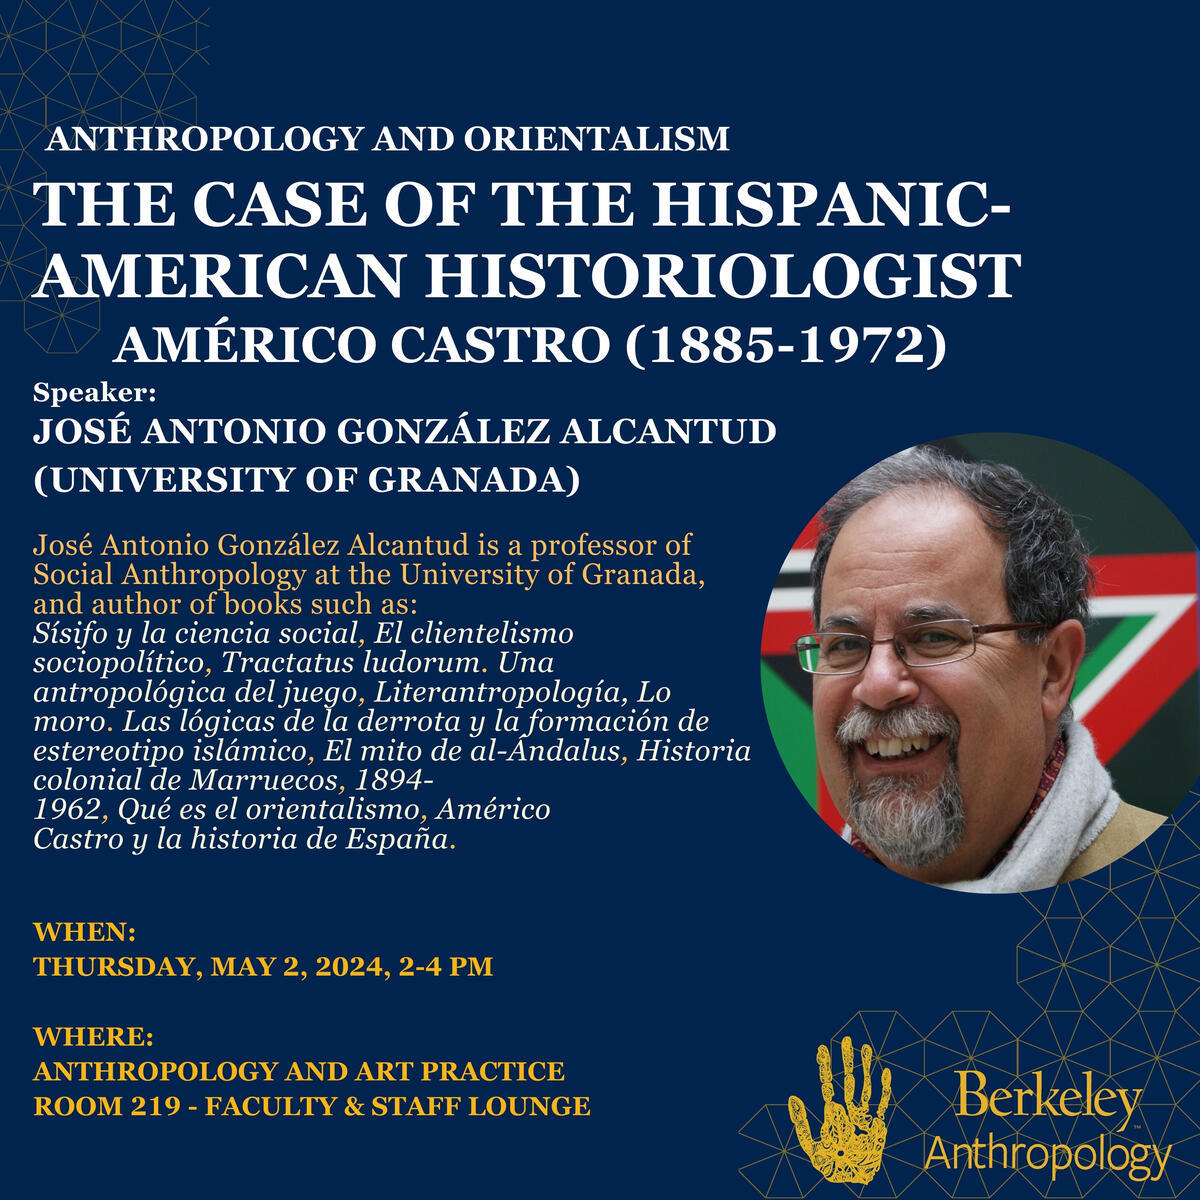 The Department of Anthropology invites you to attend Professor José Antonio González Alcantud (Unversity of Granada) lecture on Anthropology and Orientalism: The Case of the Hispanic-American Historiologist: Américo Castro (1885-1972)